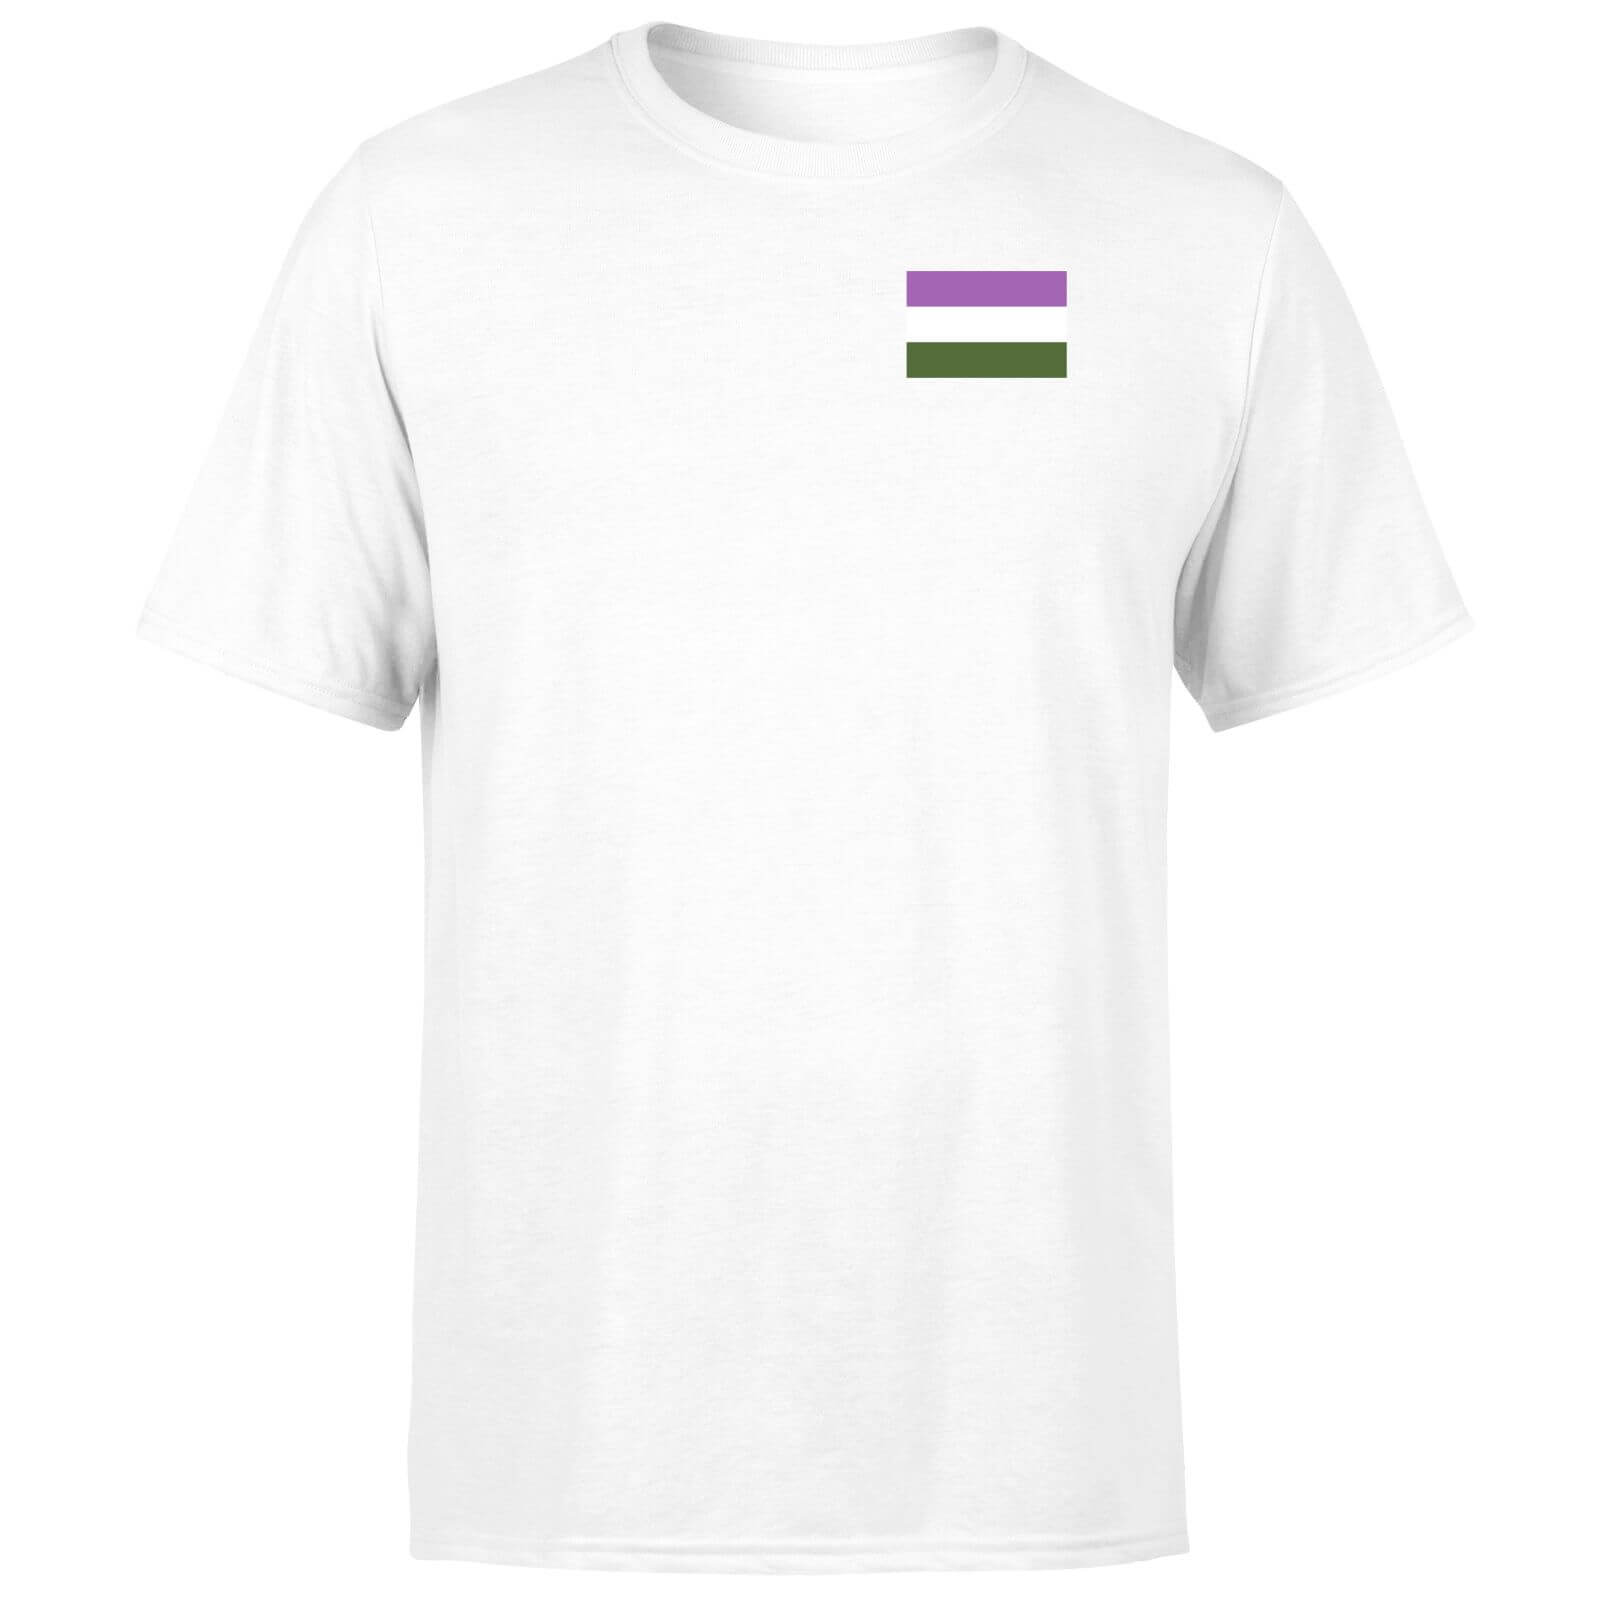 Genderqueer Flag T-Shirt - White - XS - White